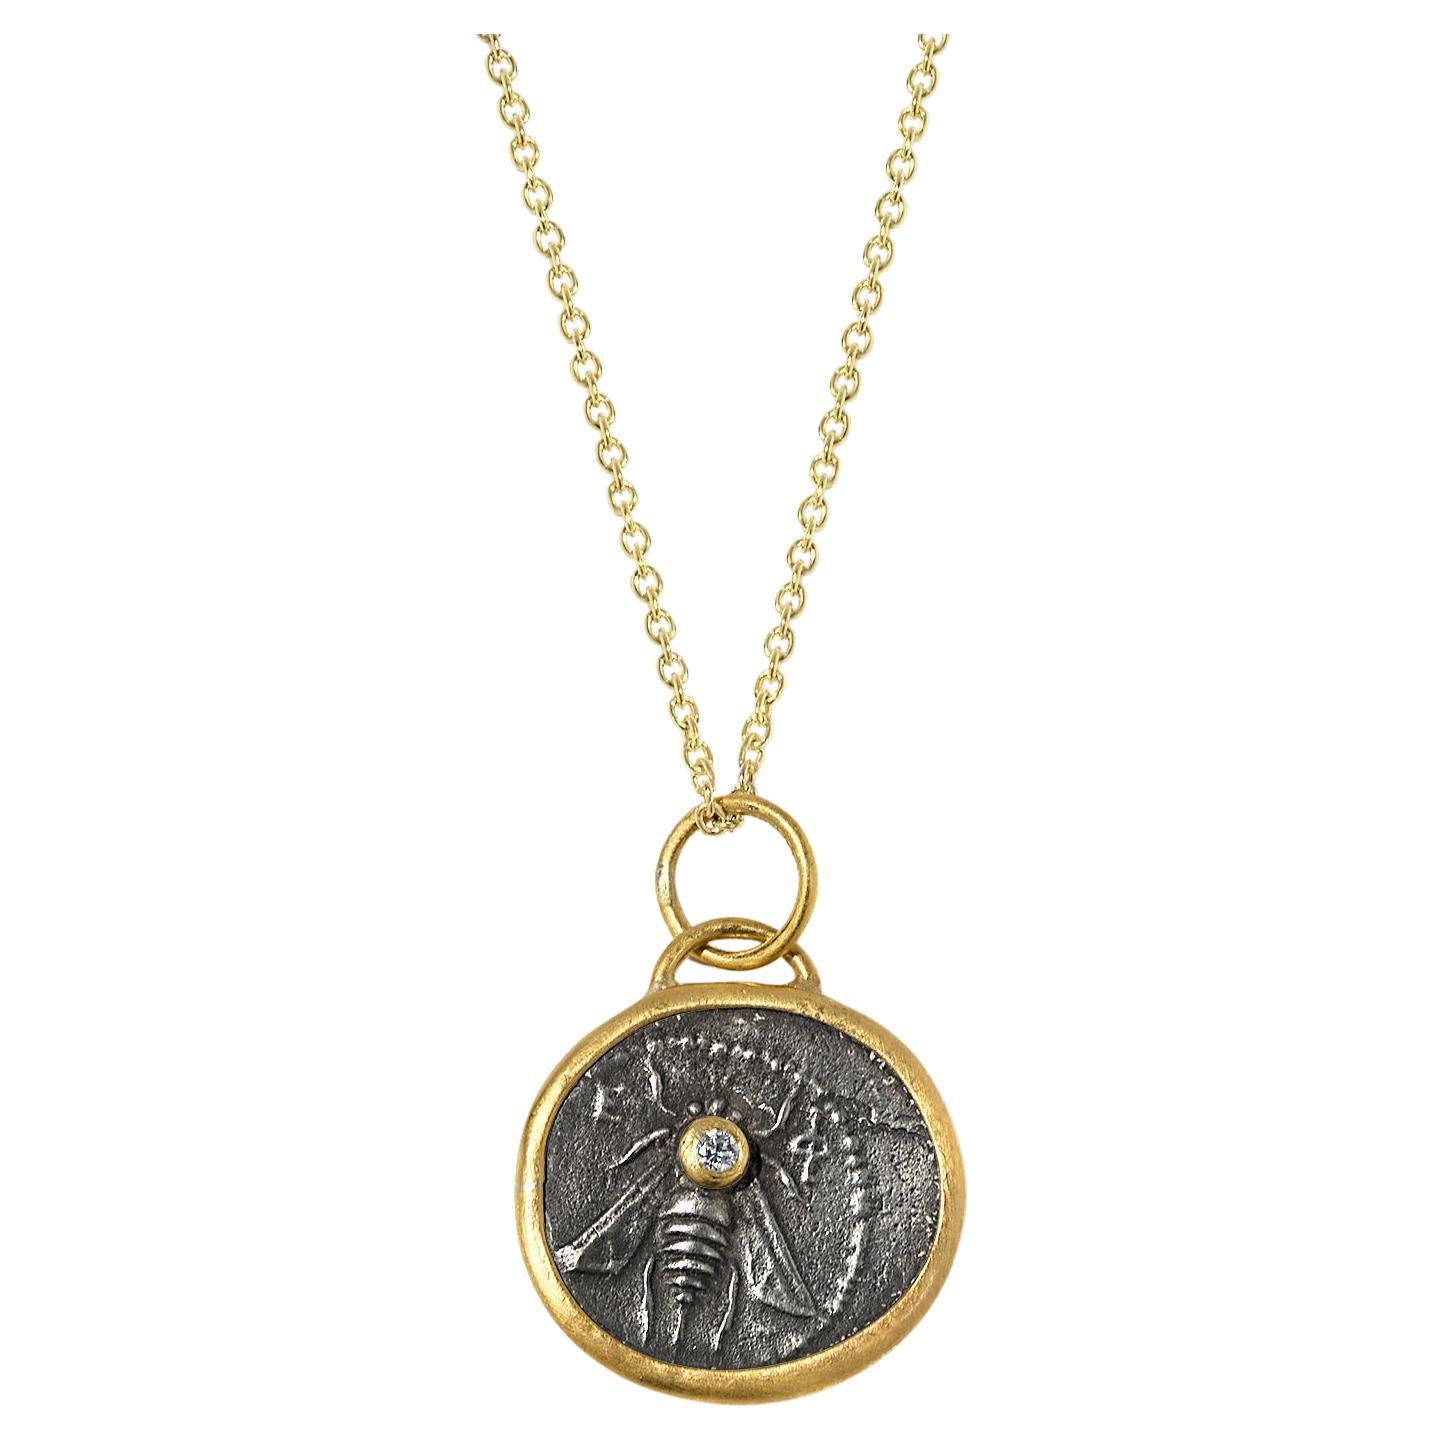 Queen Bee, Ephesus Coin, Tetra Drachm, Pendant Necklace Charm Coin Amulet with D For Sale